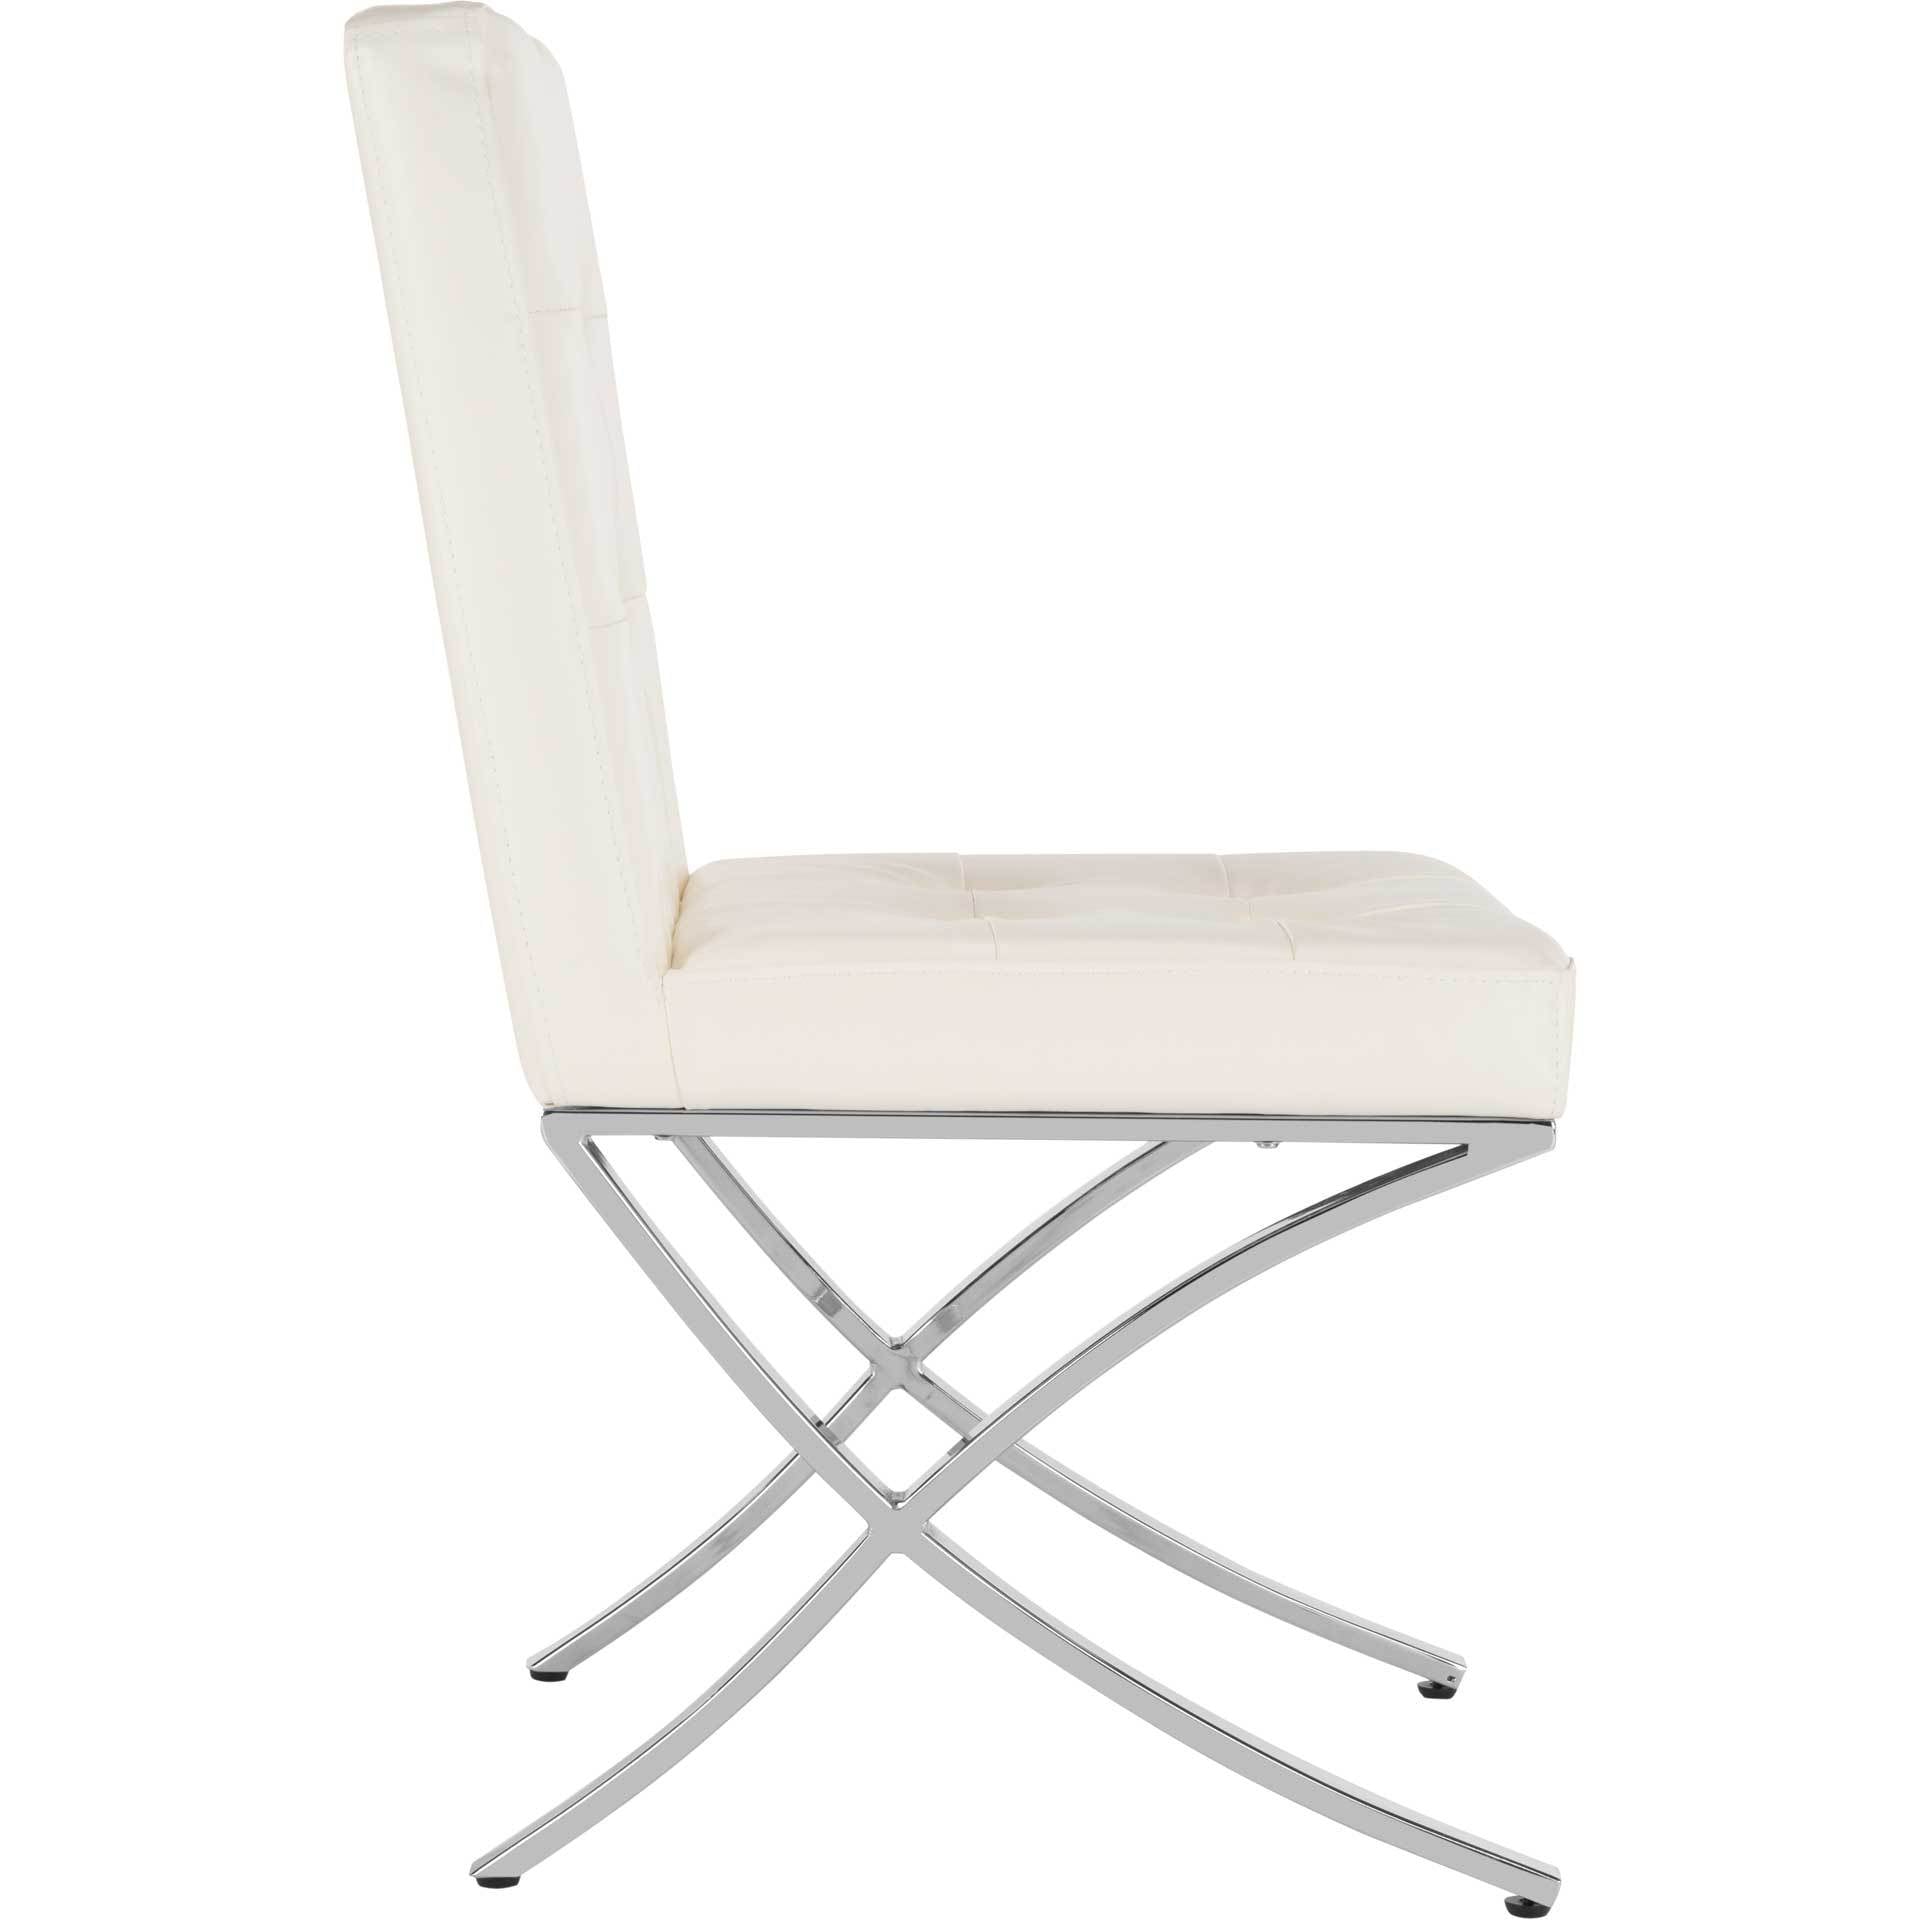 Wade Tufted Side Chair White